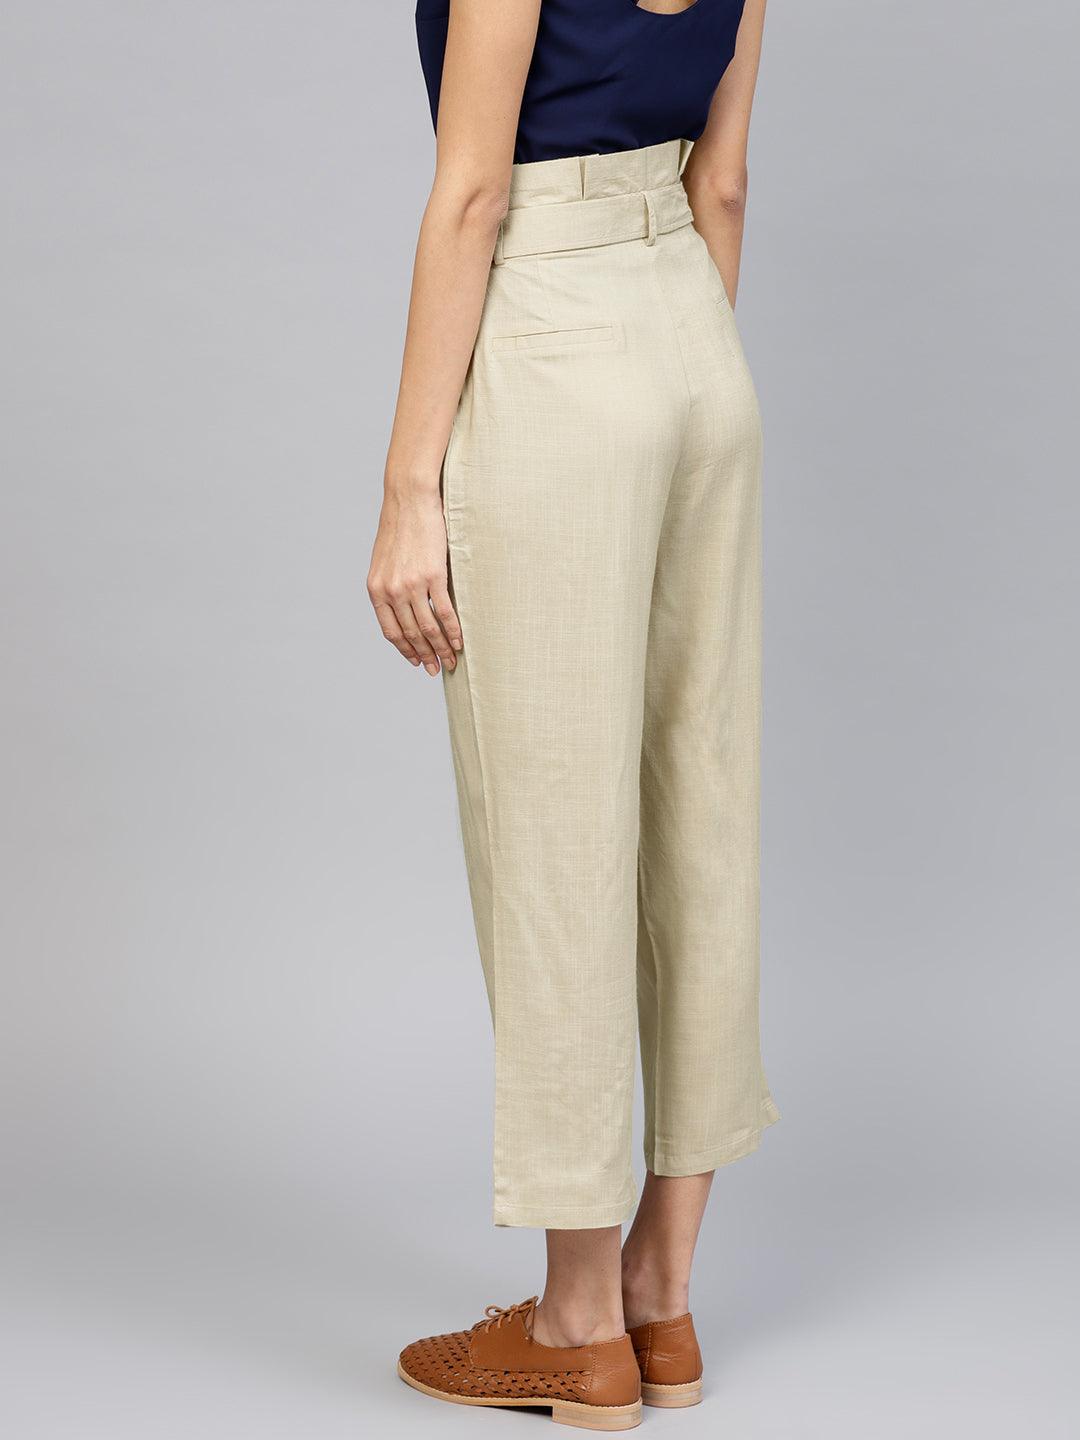 Beige Solid Rayon Trousers - Libas